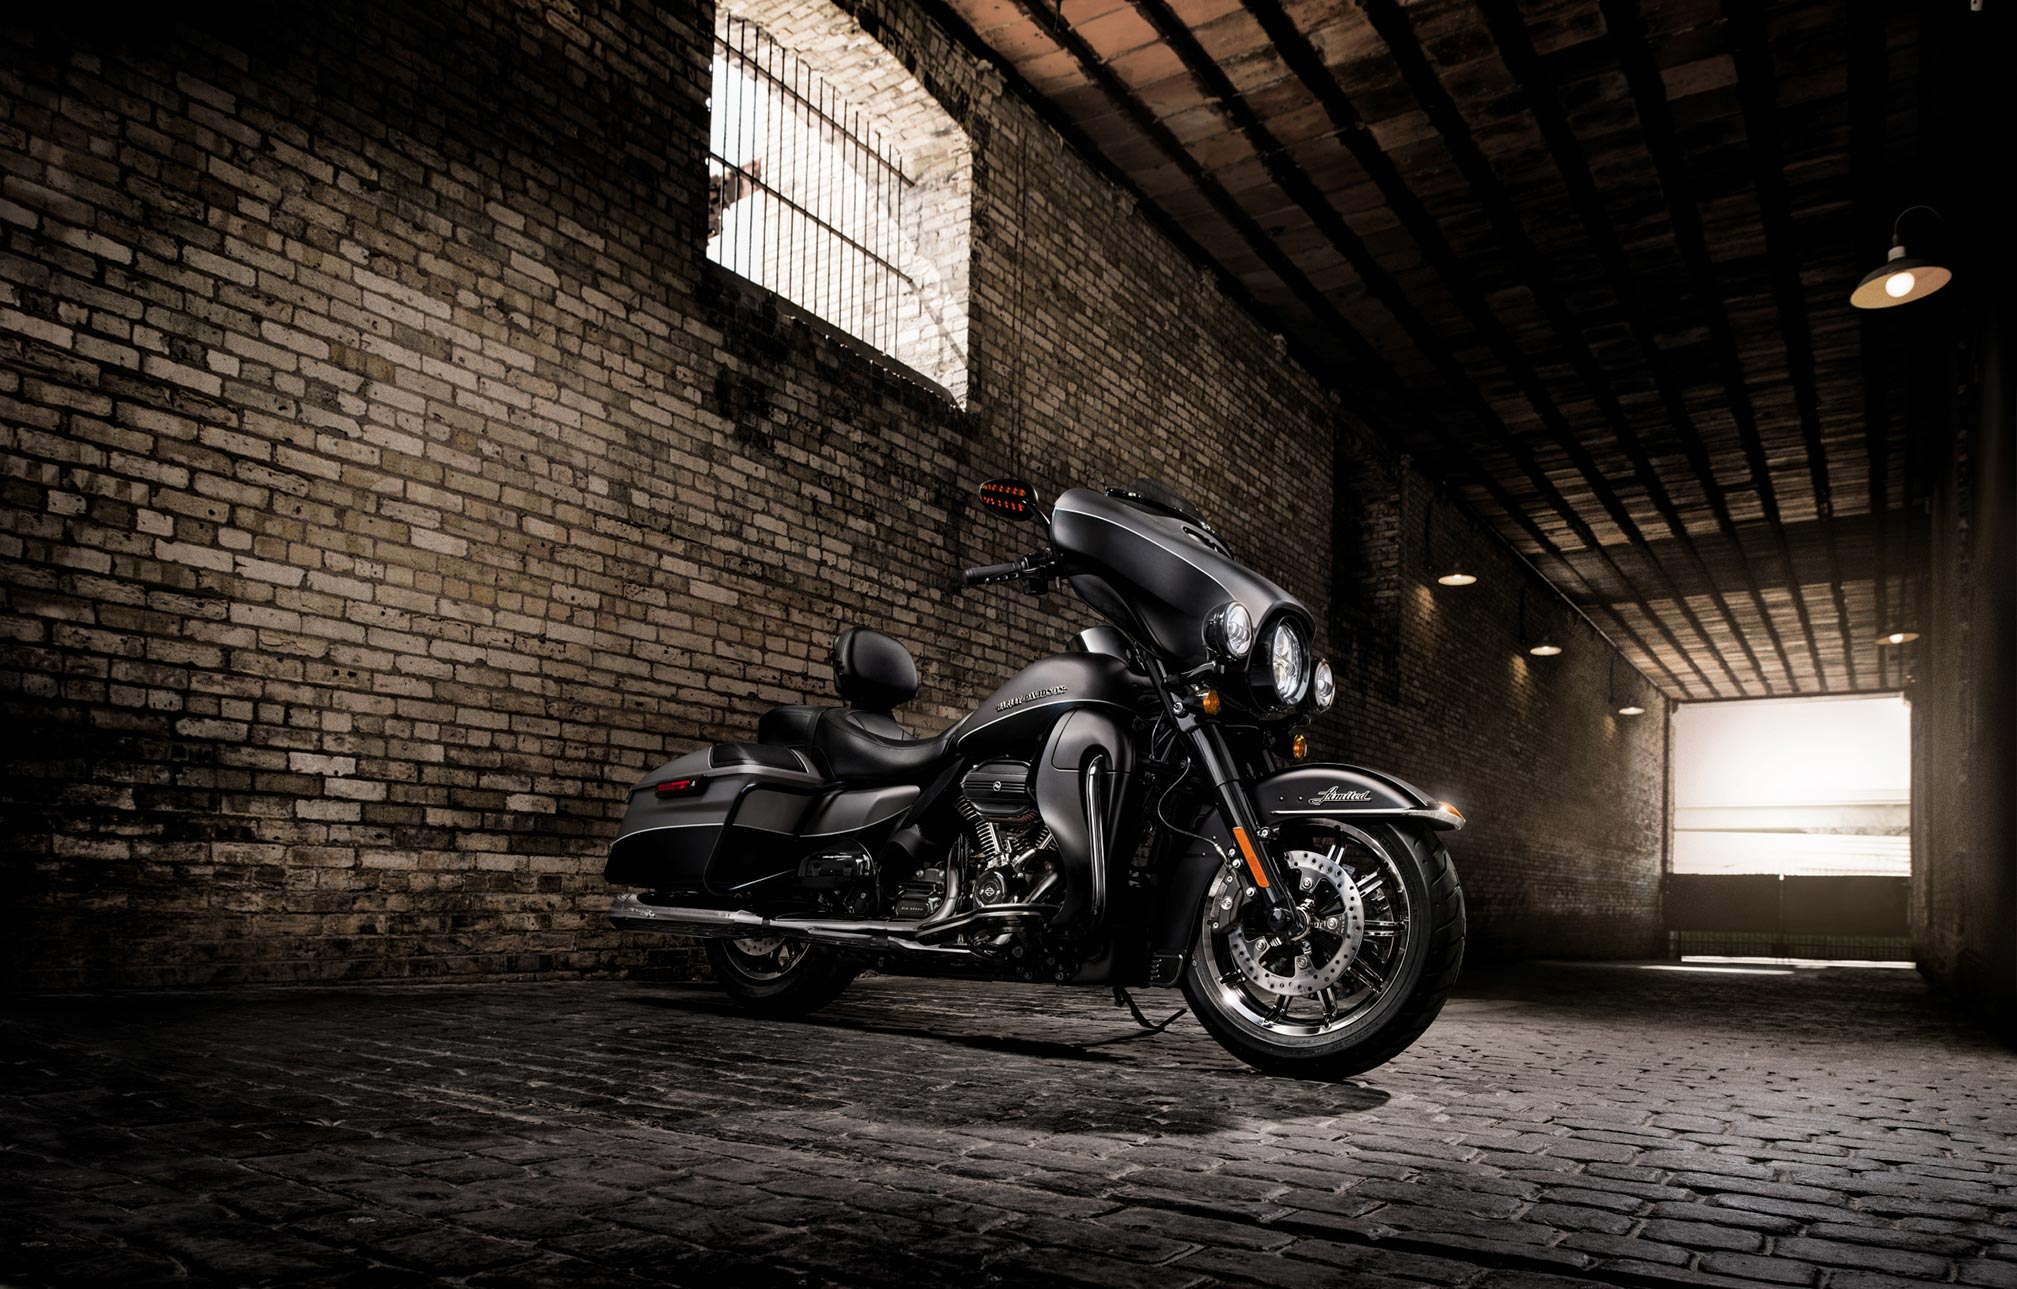 Harley Davidson Photos Download The BEST Free Harley Davidson Stock Photos   HD Images